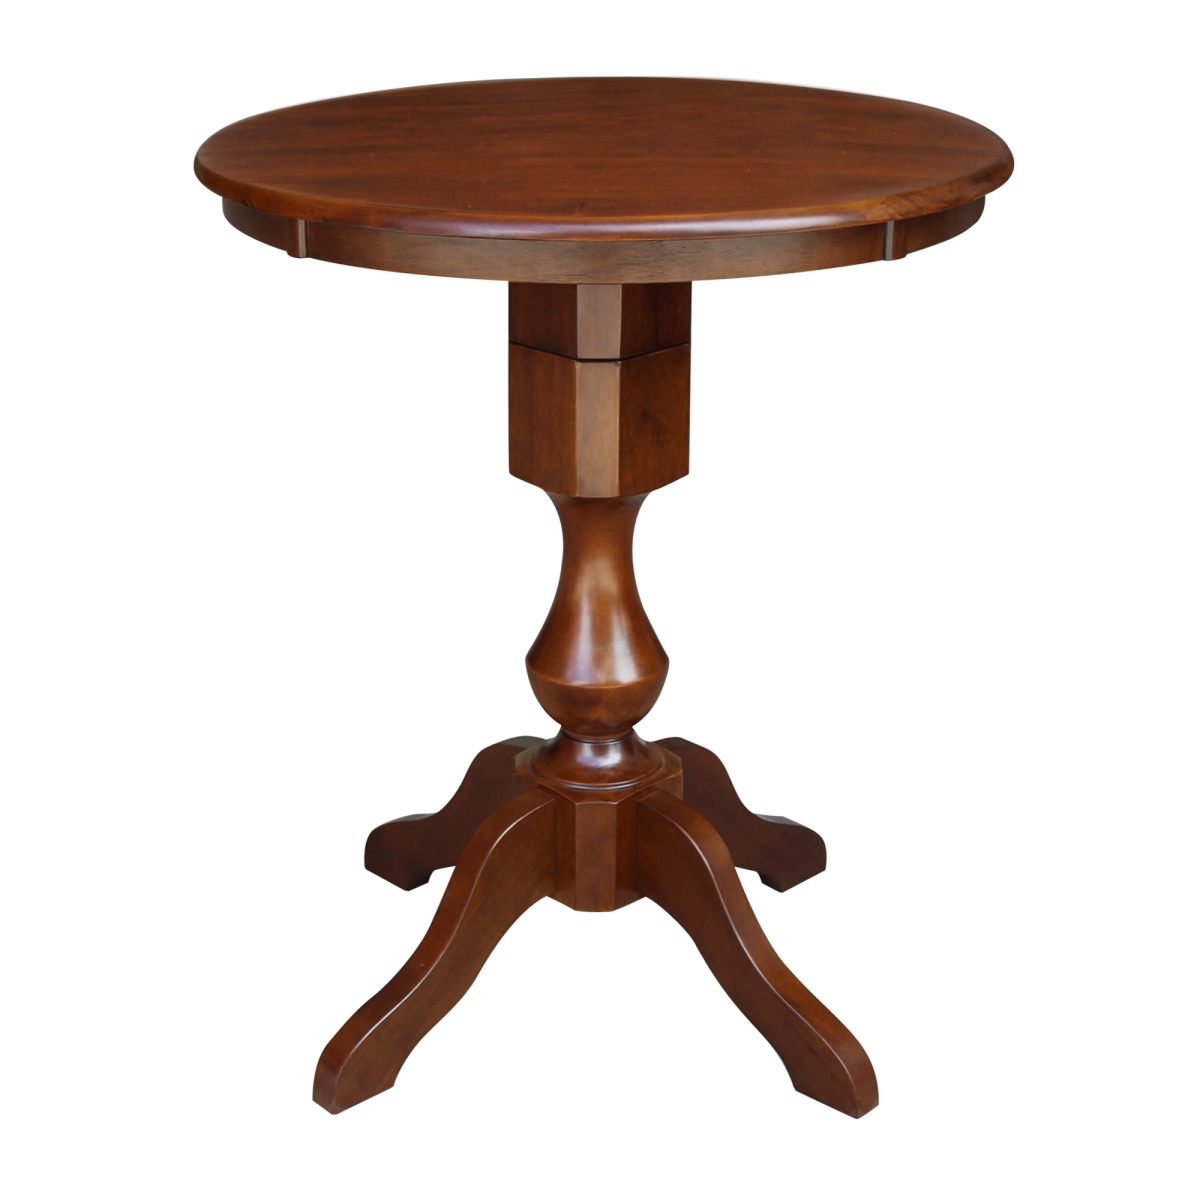 K581-30rt-11p 34.9 X 30 In. Round Top Pedestal Counter Table - Espresso